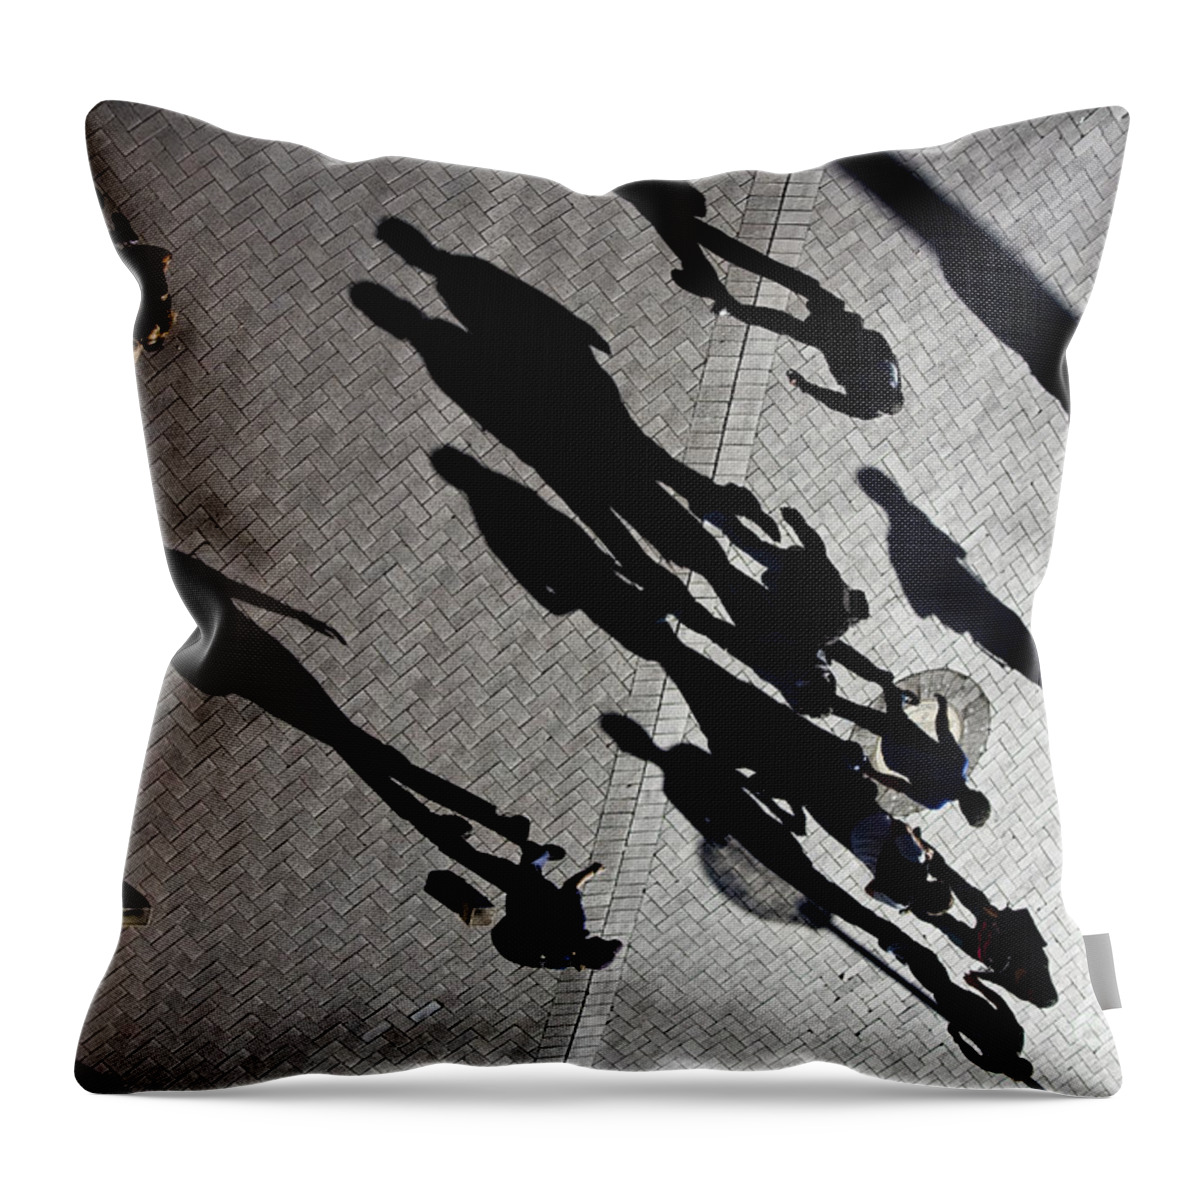 Shadows People Abstract Throw Pillow featuring the photograph Shadows by Sheila Smart Fine Art Photography